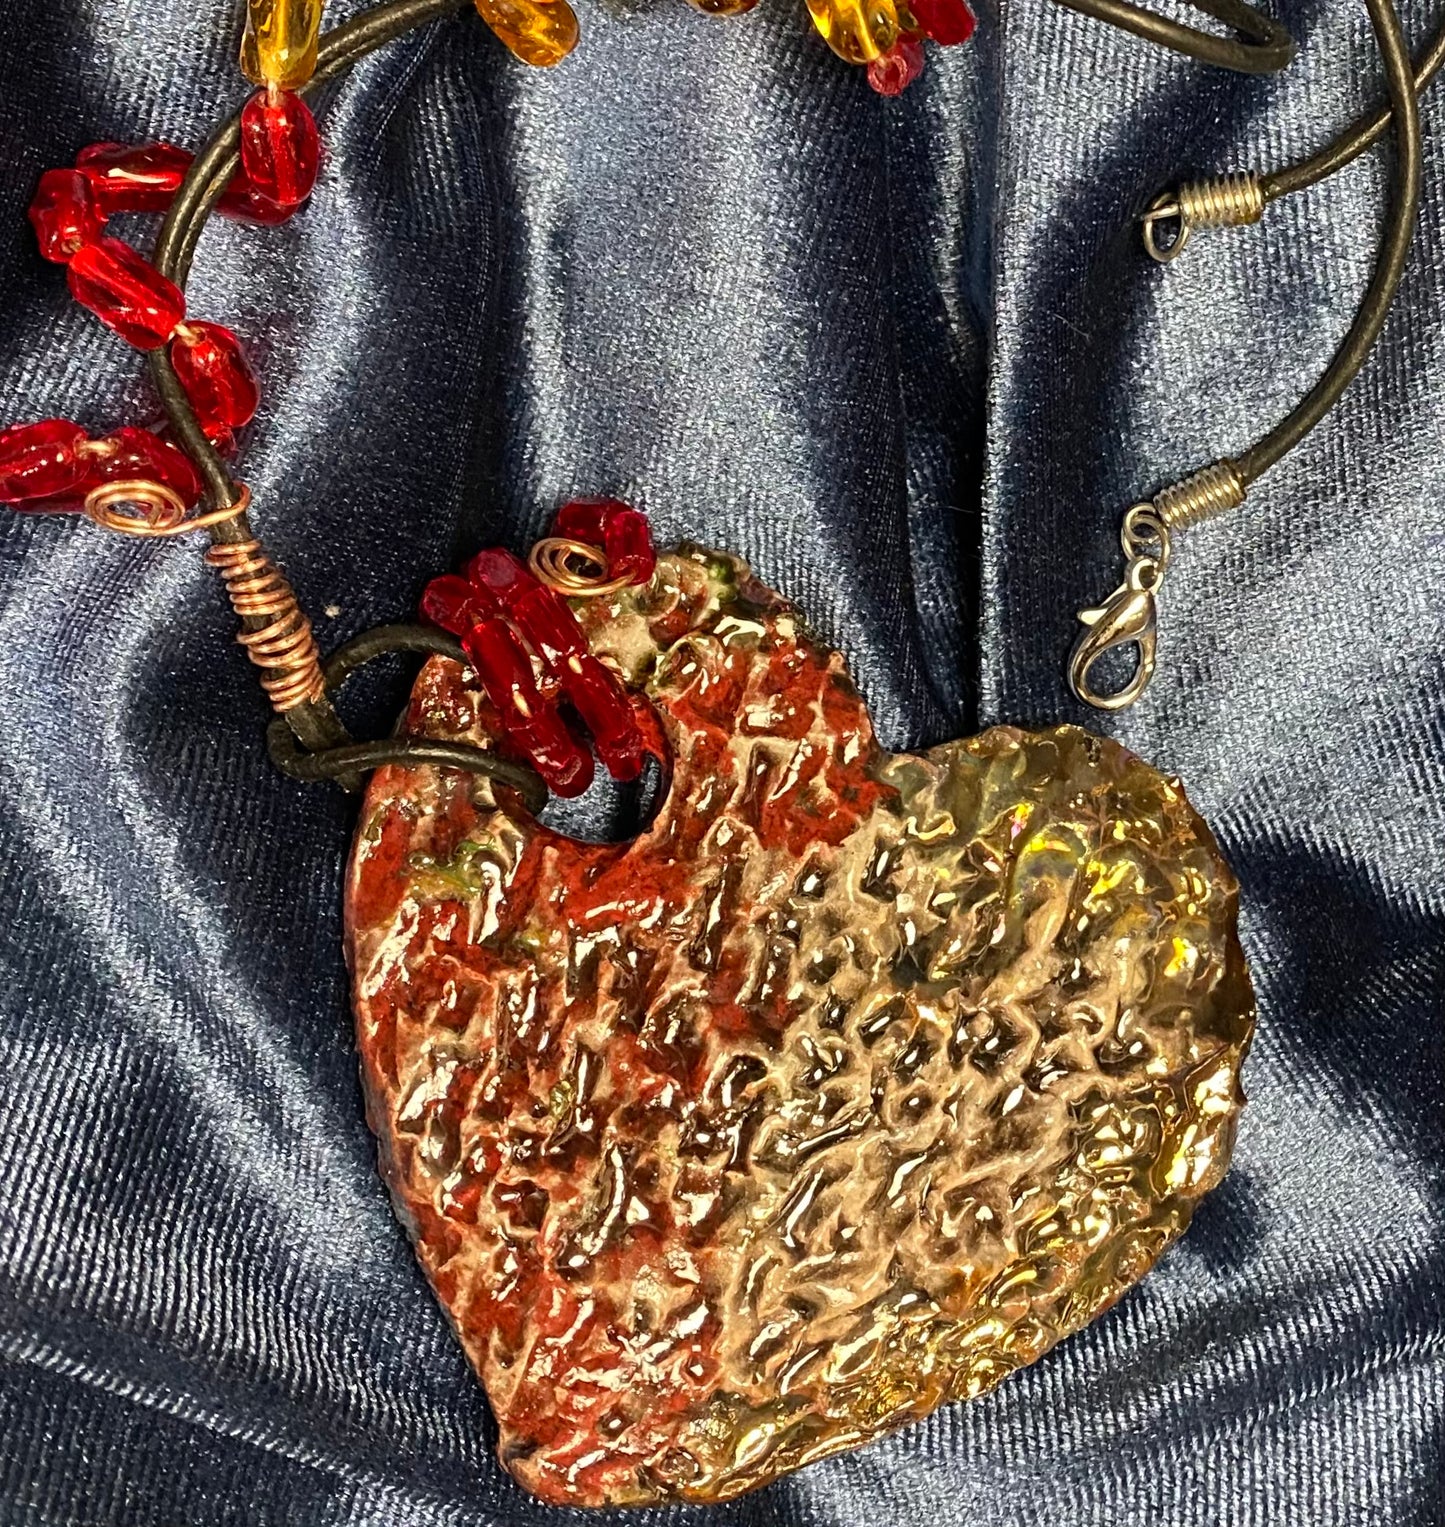 Have A Heart ! Each heart pendant is handmade with love! It is 3"x 3" and weighs approx. 3ozs. This pendant has a red and gold metallic raku glazes that renders a unique translucent  patina. The heart has a textured pattern . It holds a spiral of amber and red mini beads on a spiral copper wire. This pendant has a nice 12" black suede cord!